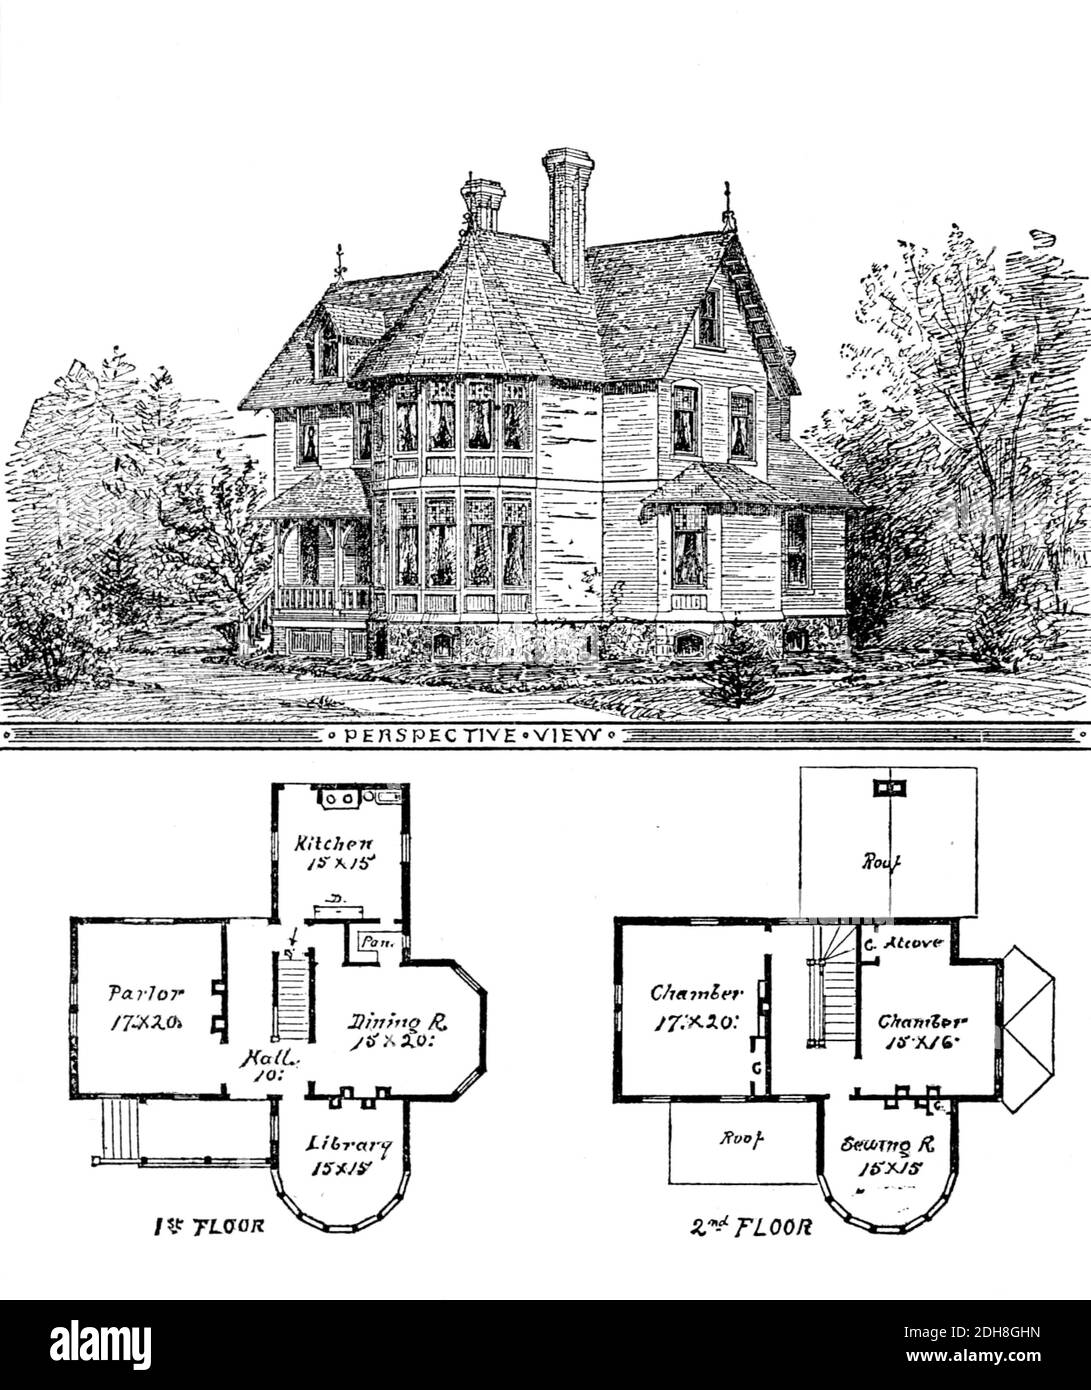 Gothic Cottage Architectural Plan And Layout From Godeys Ladys Book